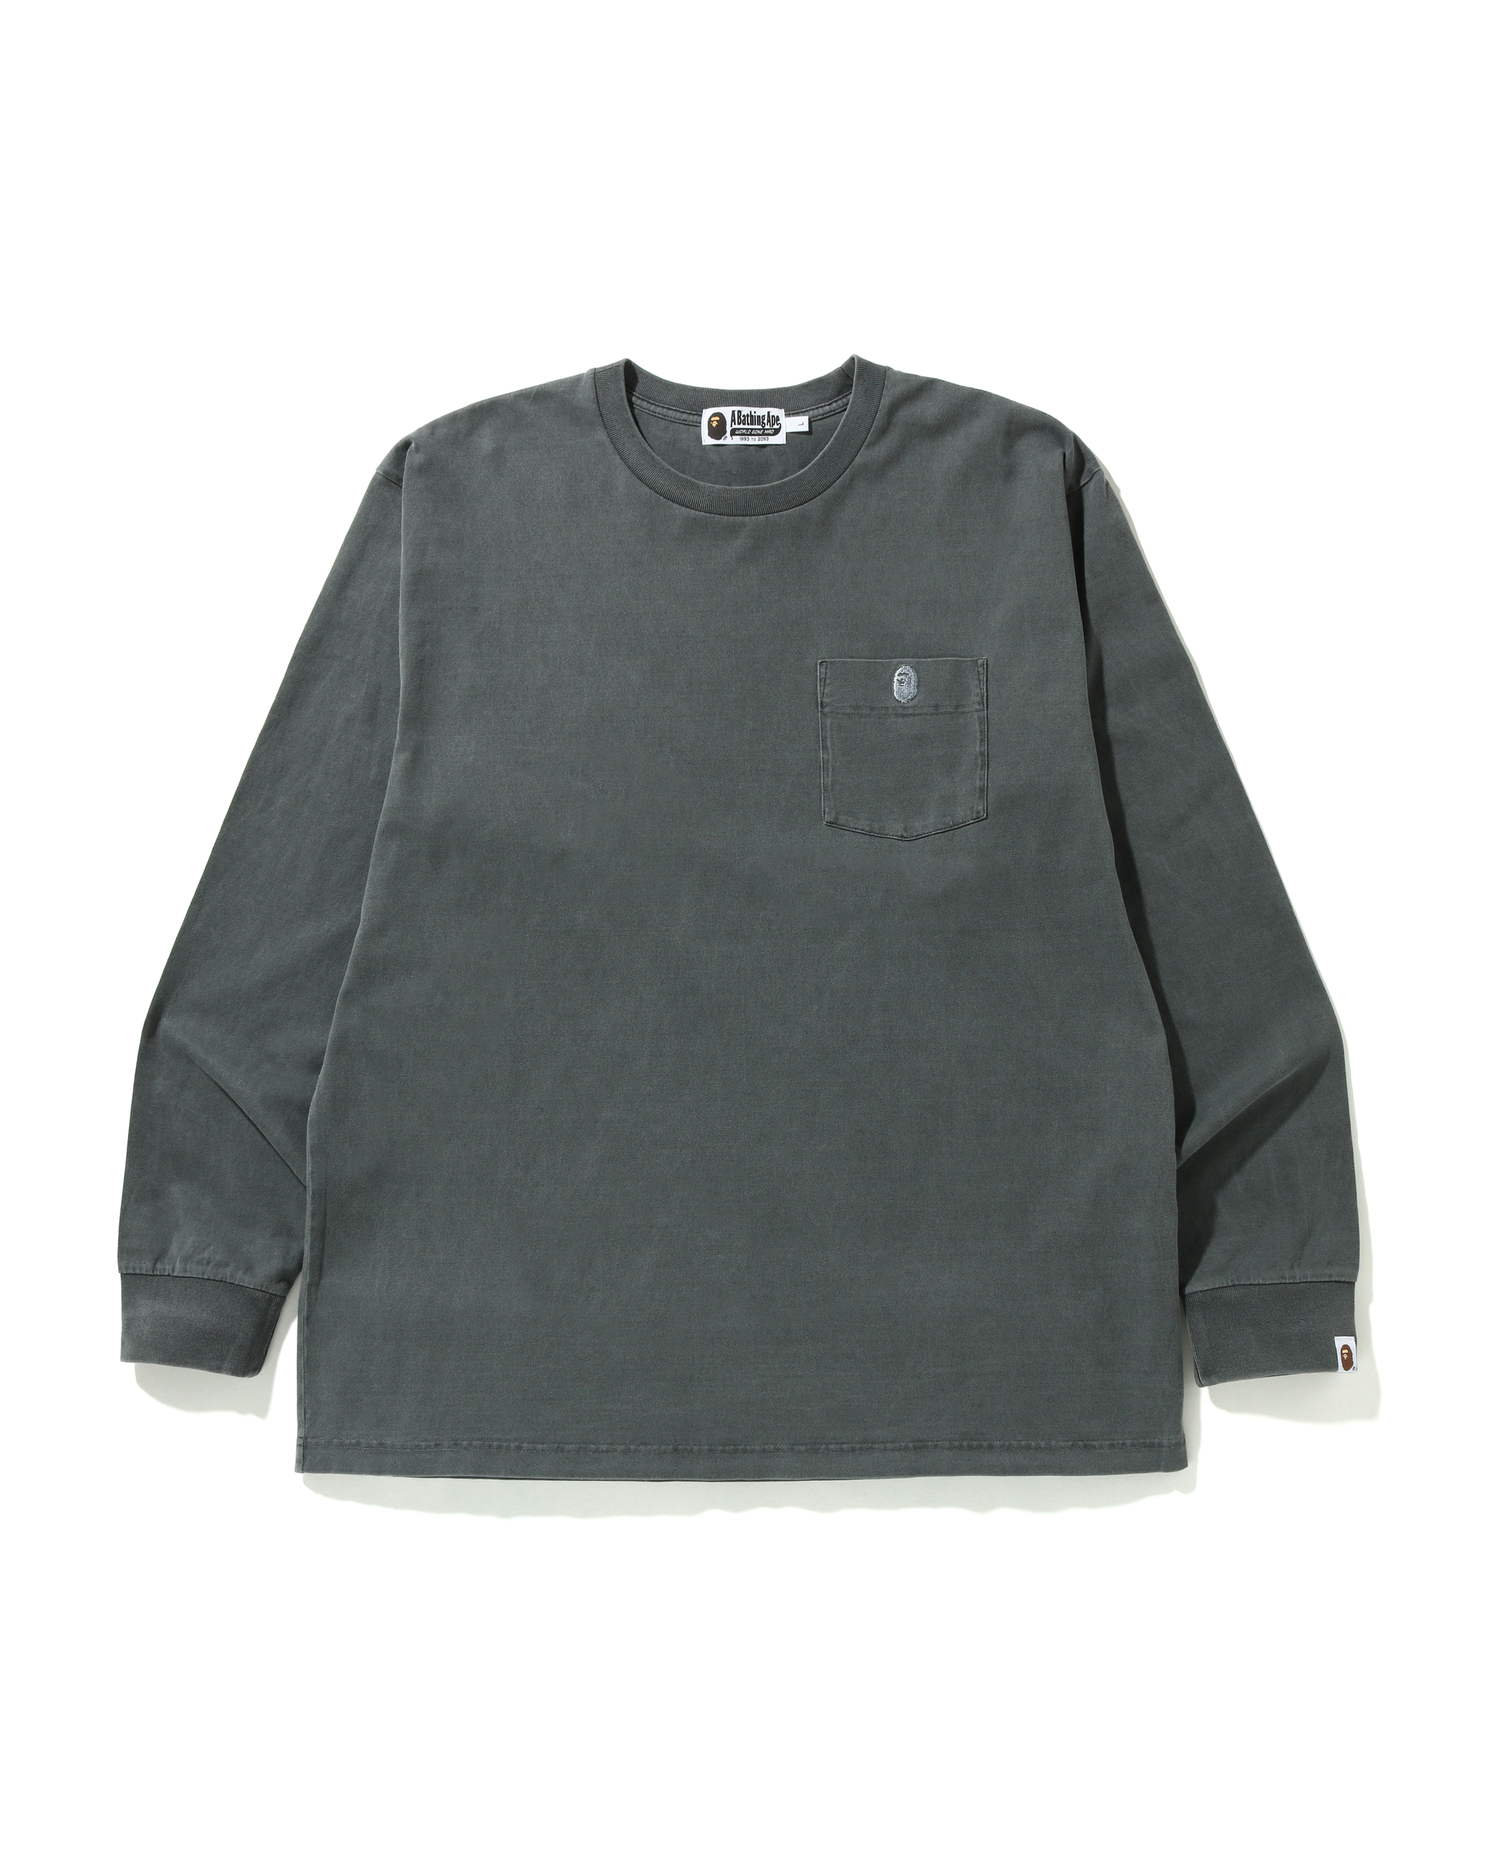 Shop Overdye One Point Pocket Relaxed Fit L/S Tee Online | BAPE